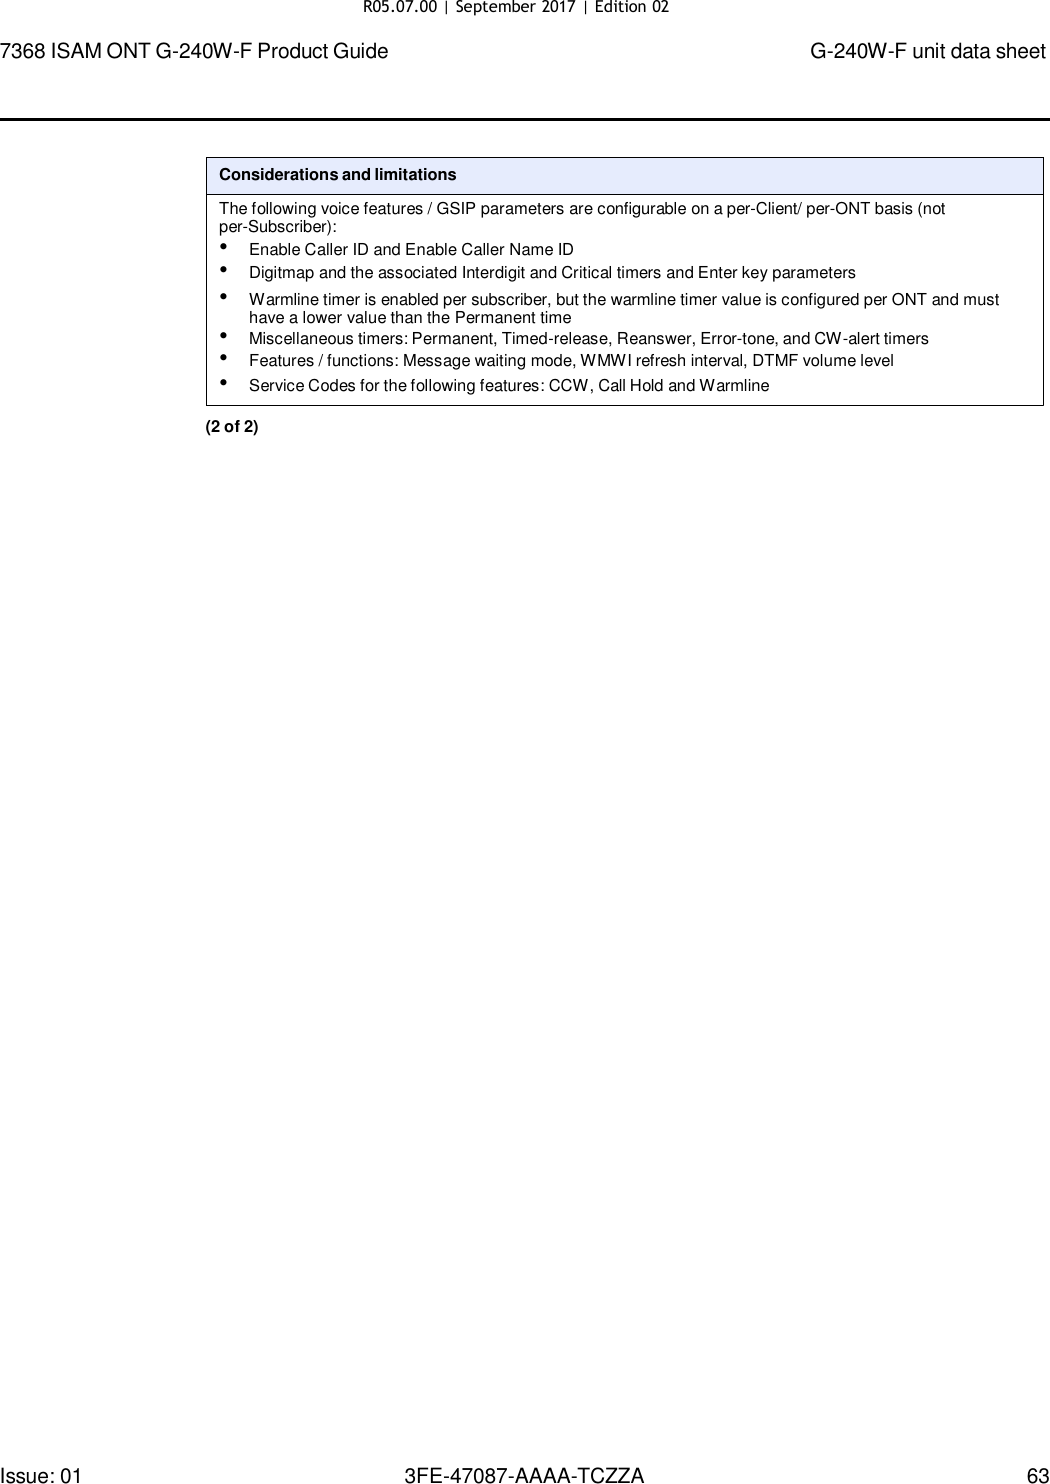 Page 60 of Nokia Bell G240WFV2 7368 ISAM GPON ONU User Manual 7368 ISAM ONT G 240W F Product Guide